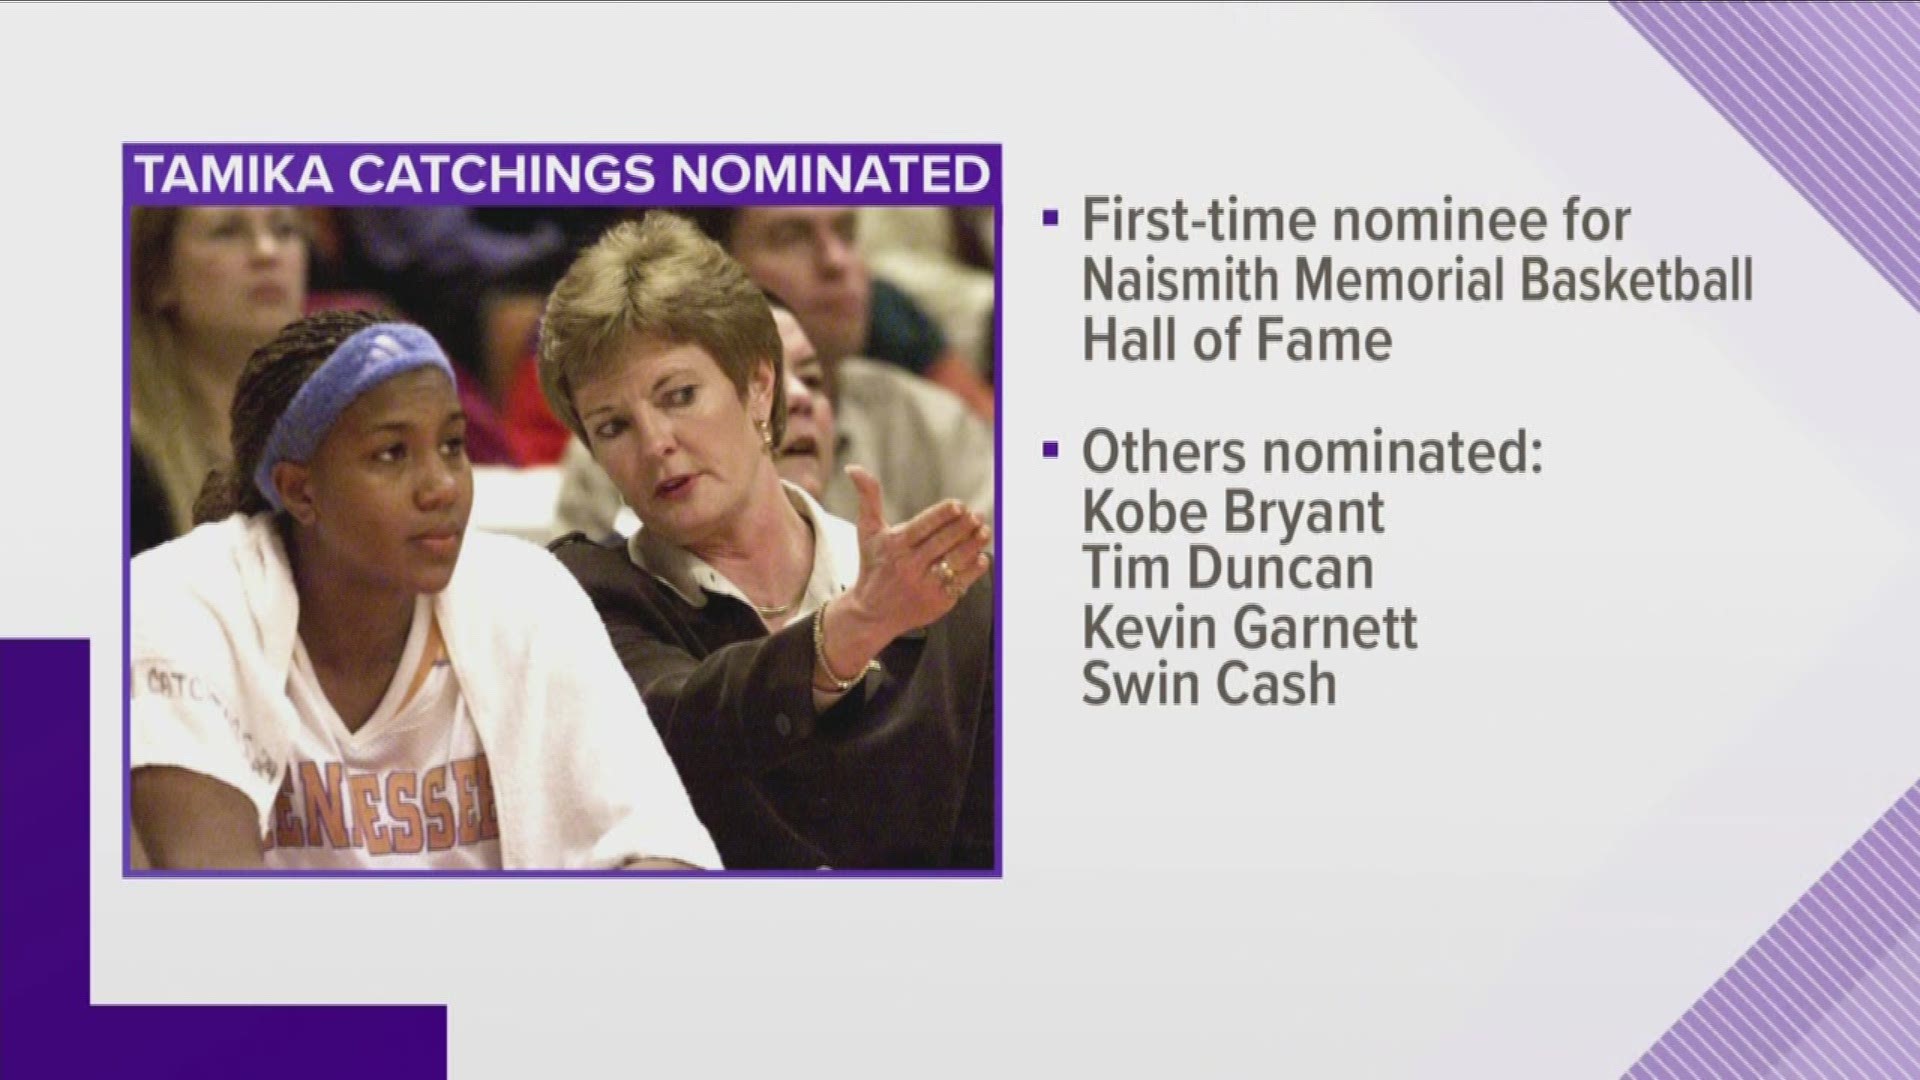 Tamika Catchings was nominated to the Naismith Memorial Hall of Fame for the first time on Thursday.